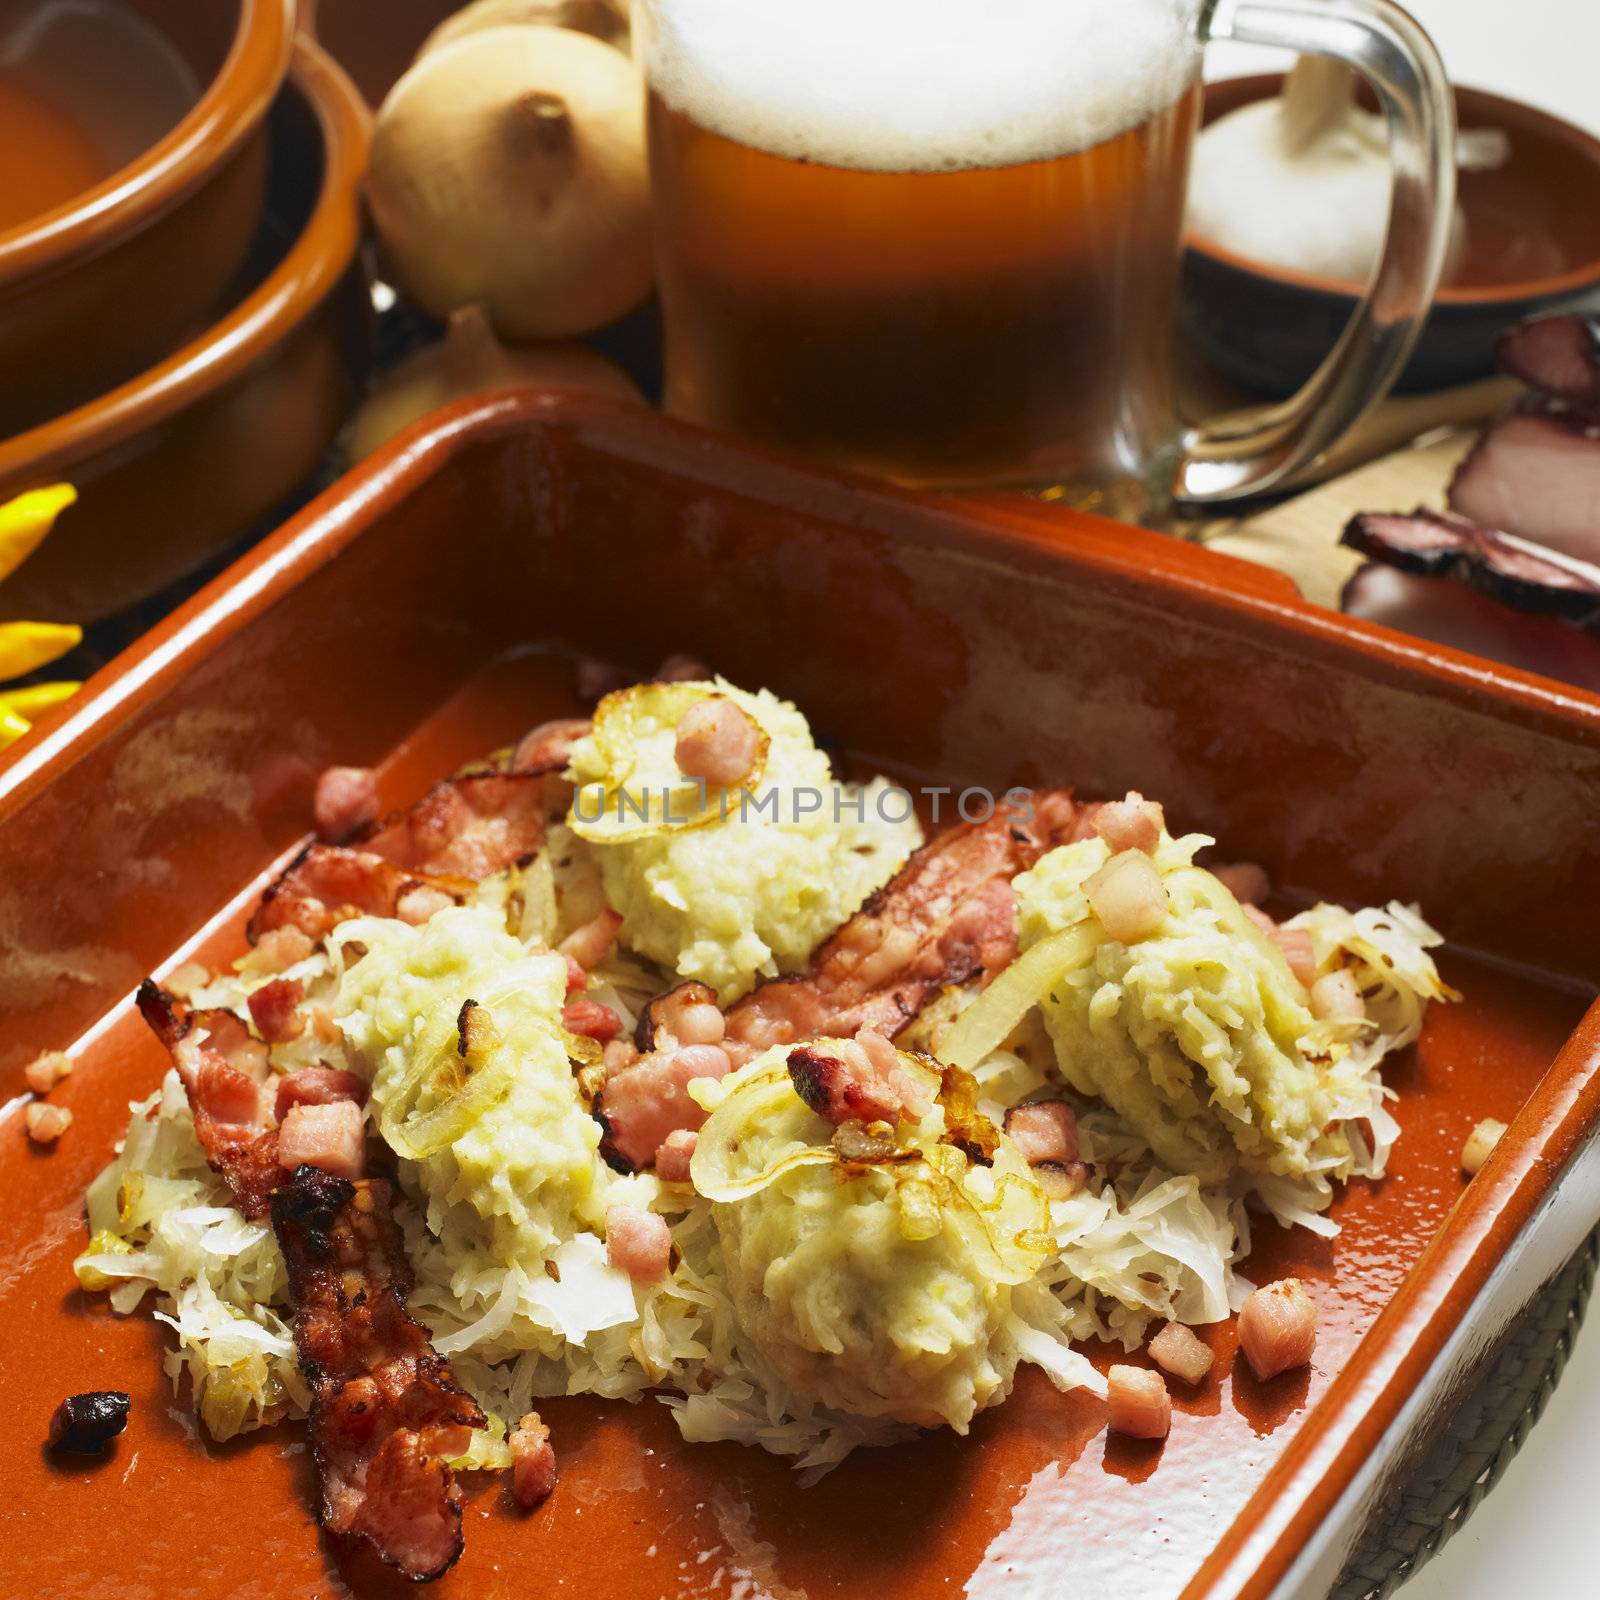 South Bohemian dumplings with cabbage